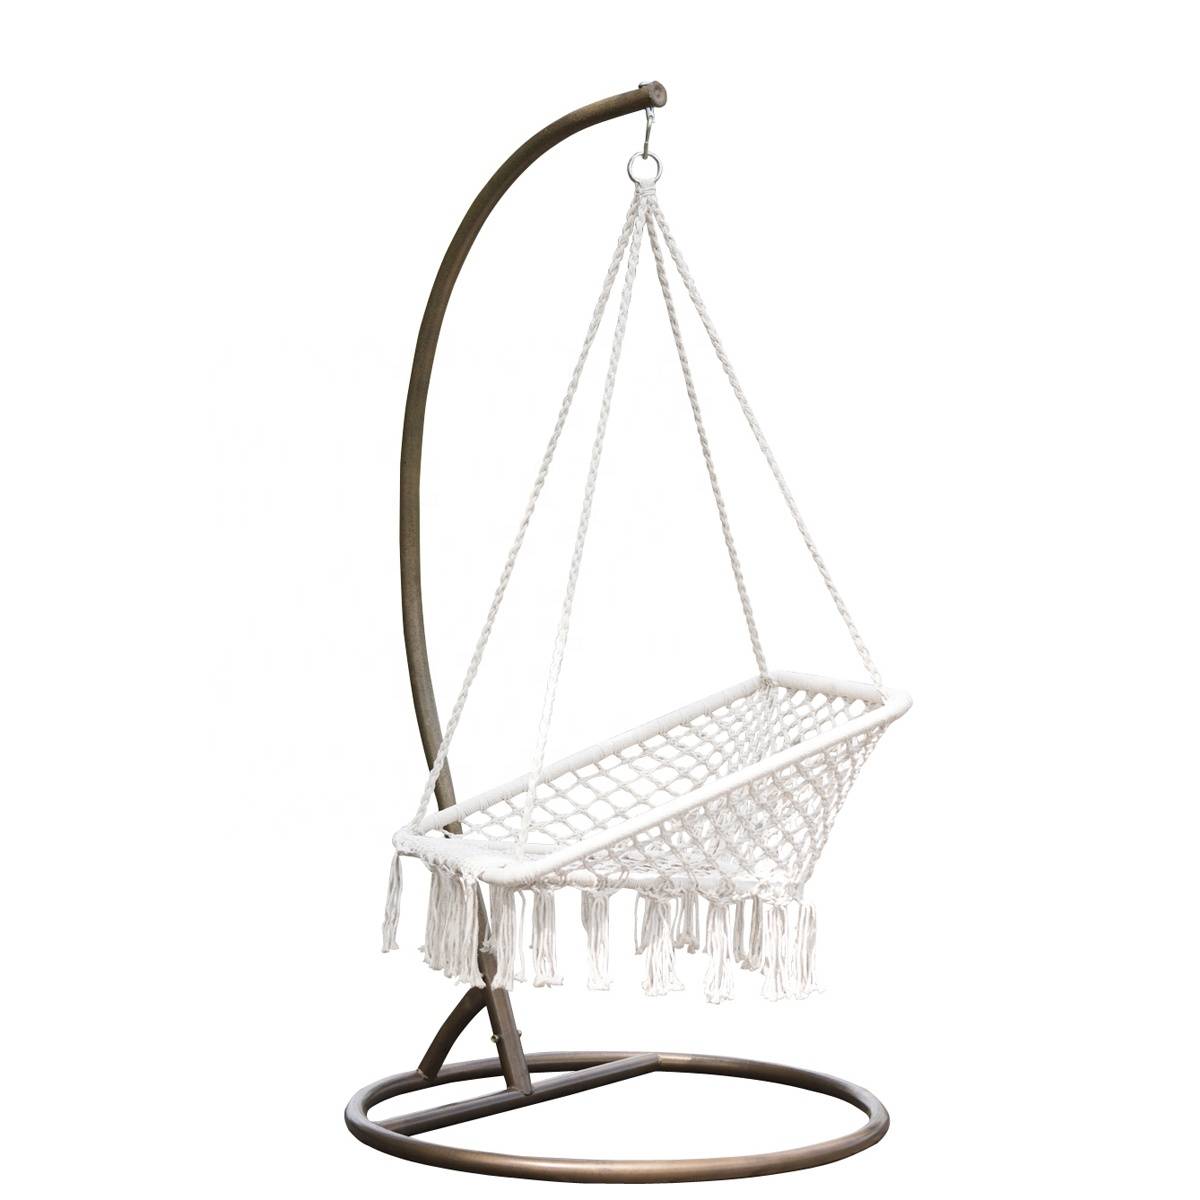 Reasonable price Hammock Chair And Stand - Hanging Square  Hammock Swing Chair, Outdoor Garden Rope Swing Chair – Top Asian